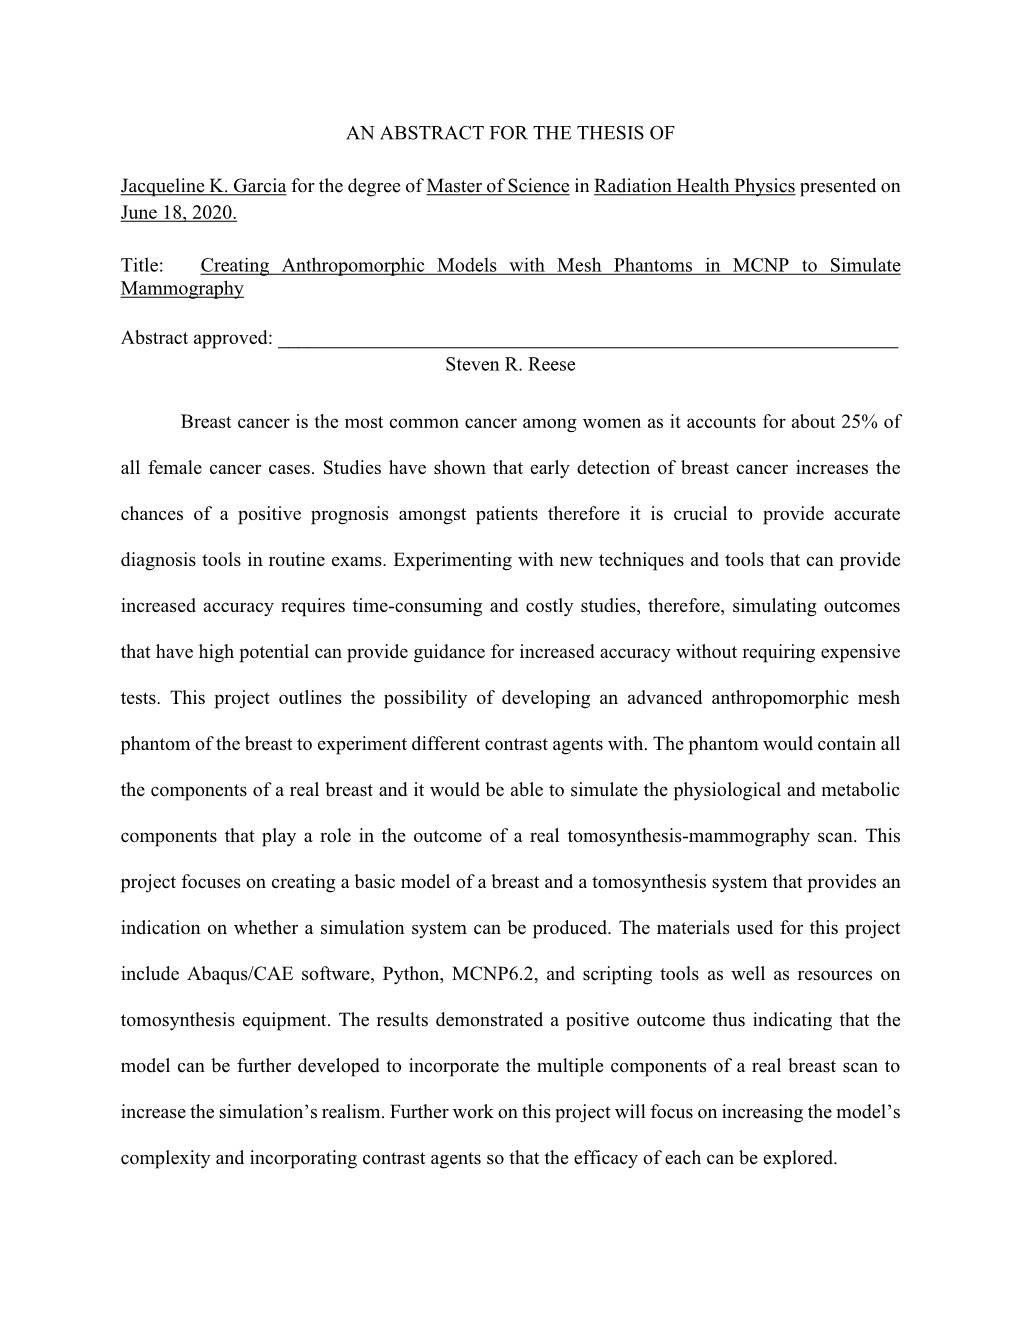 AN ABSTRACT for the THESIS of Jacqueline K. Garcia for the Degree of Master of Science in Radiation Health Physics Presented On